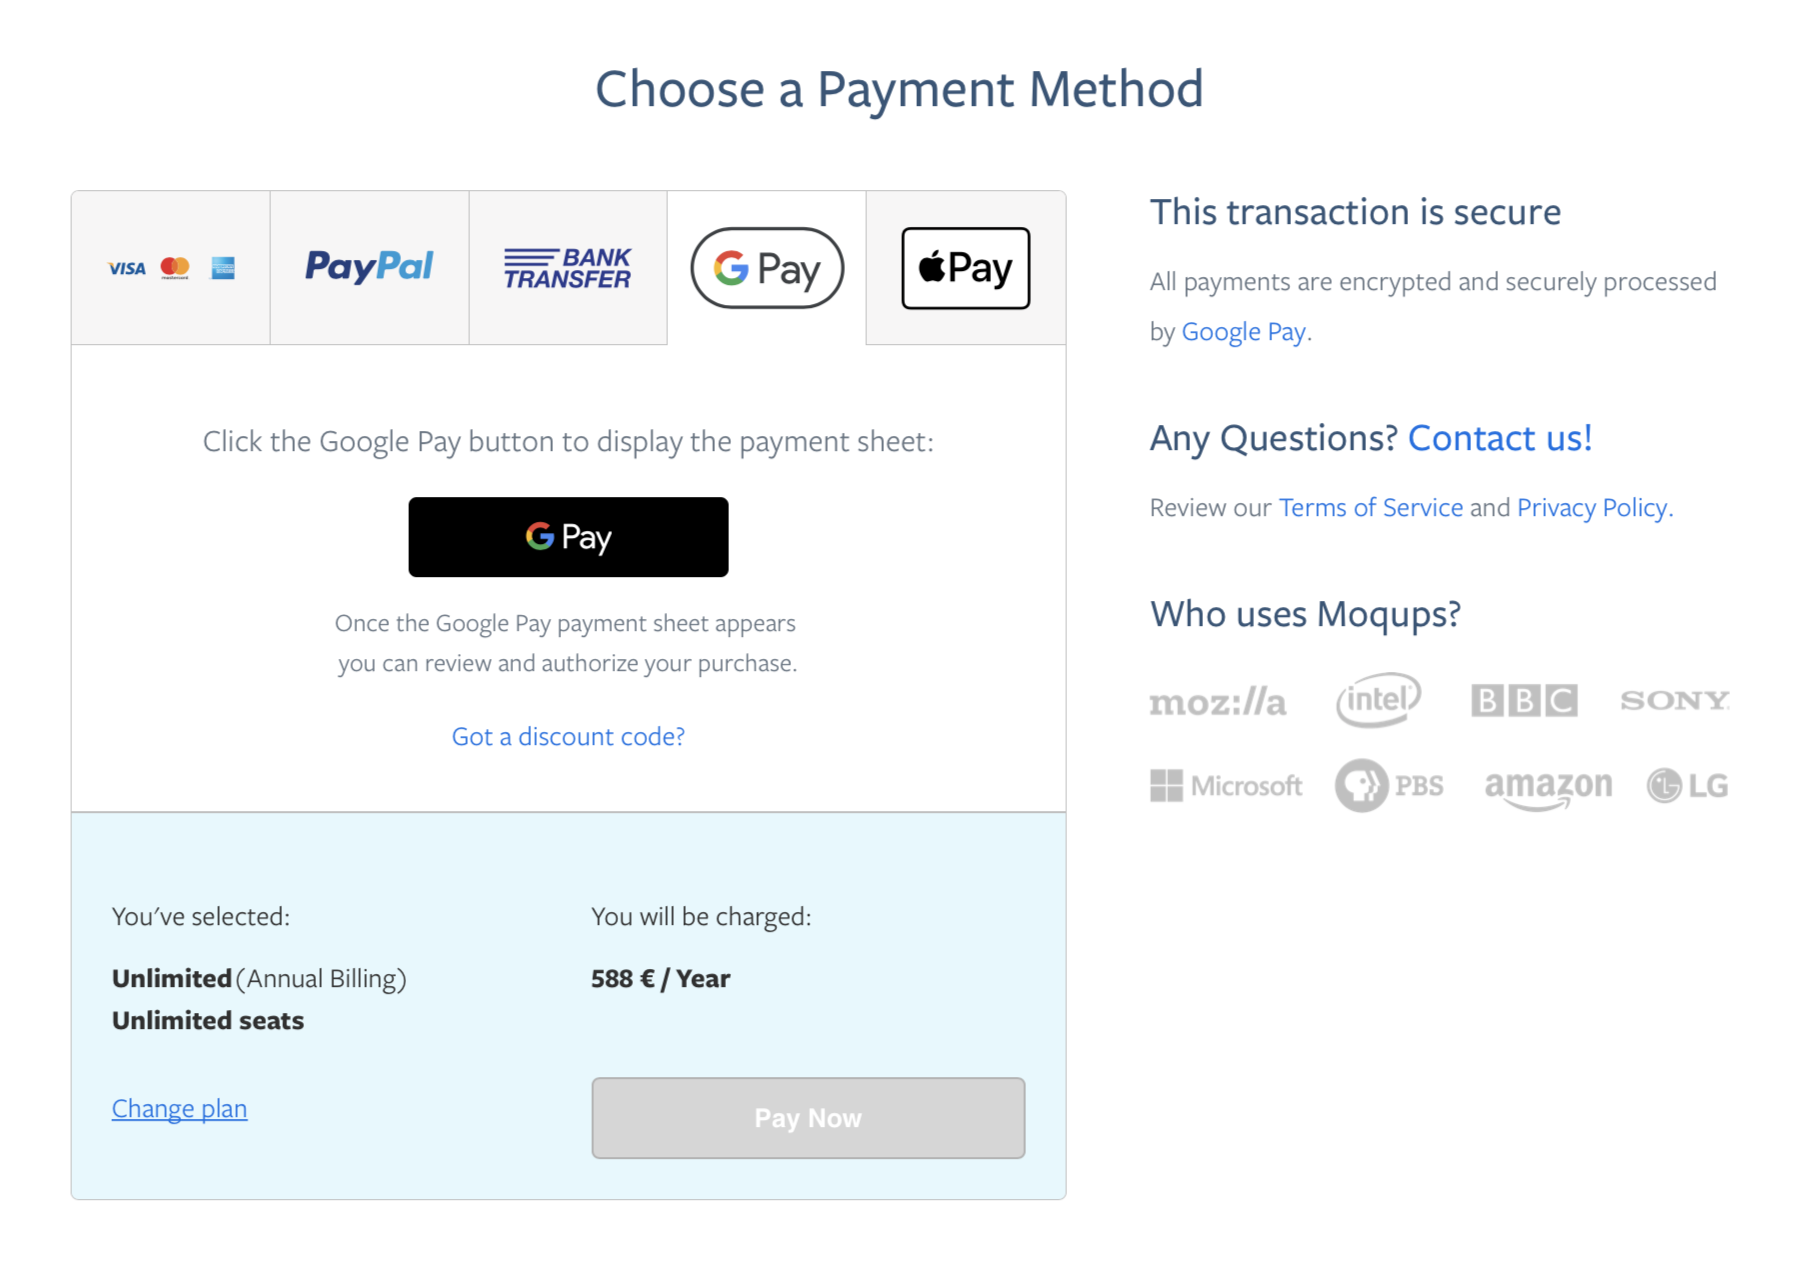 09._NEW_Your_Account_-_Google_Pay_-_Payment.png